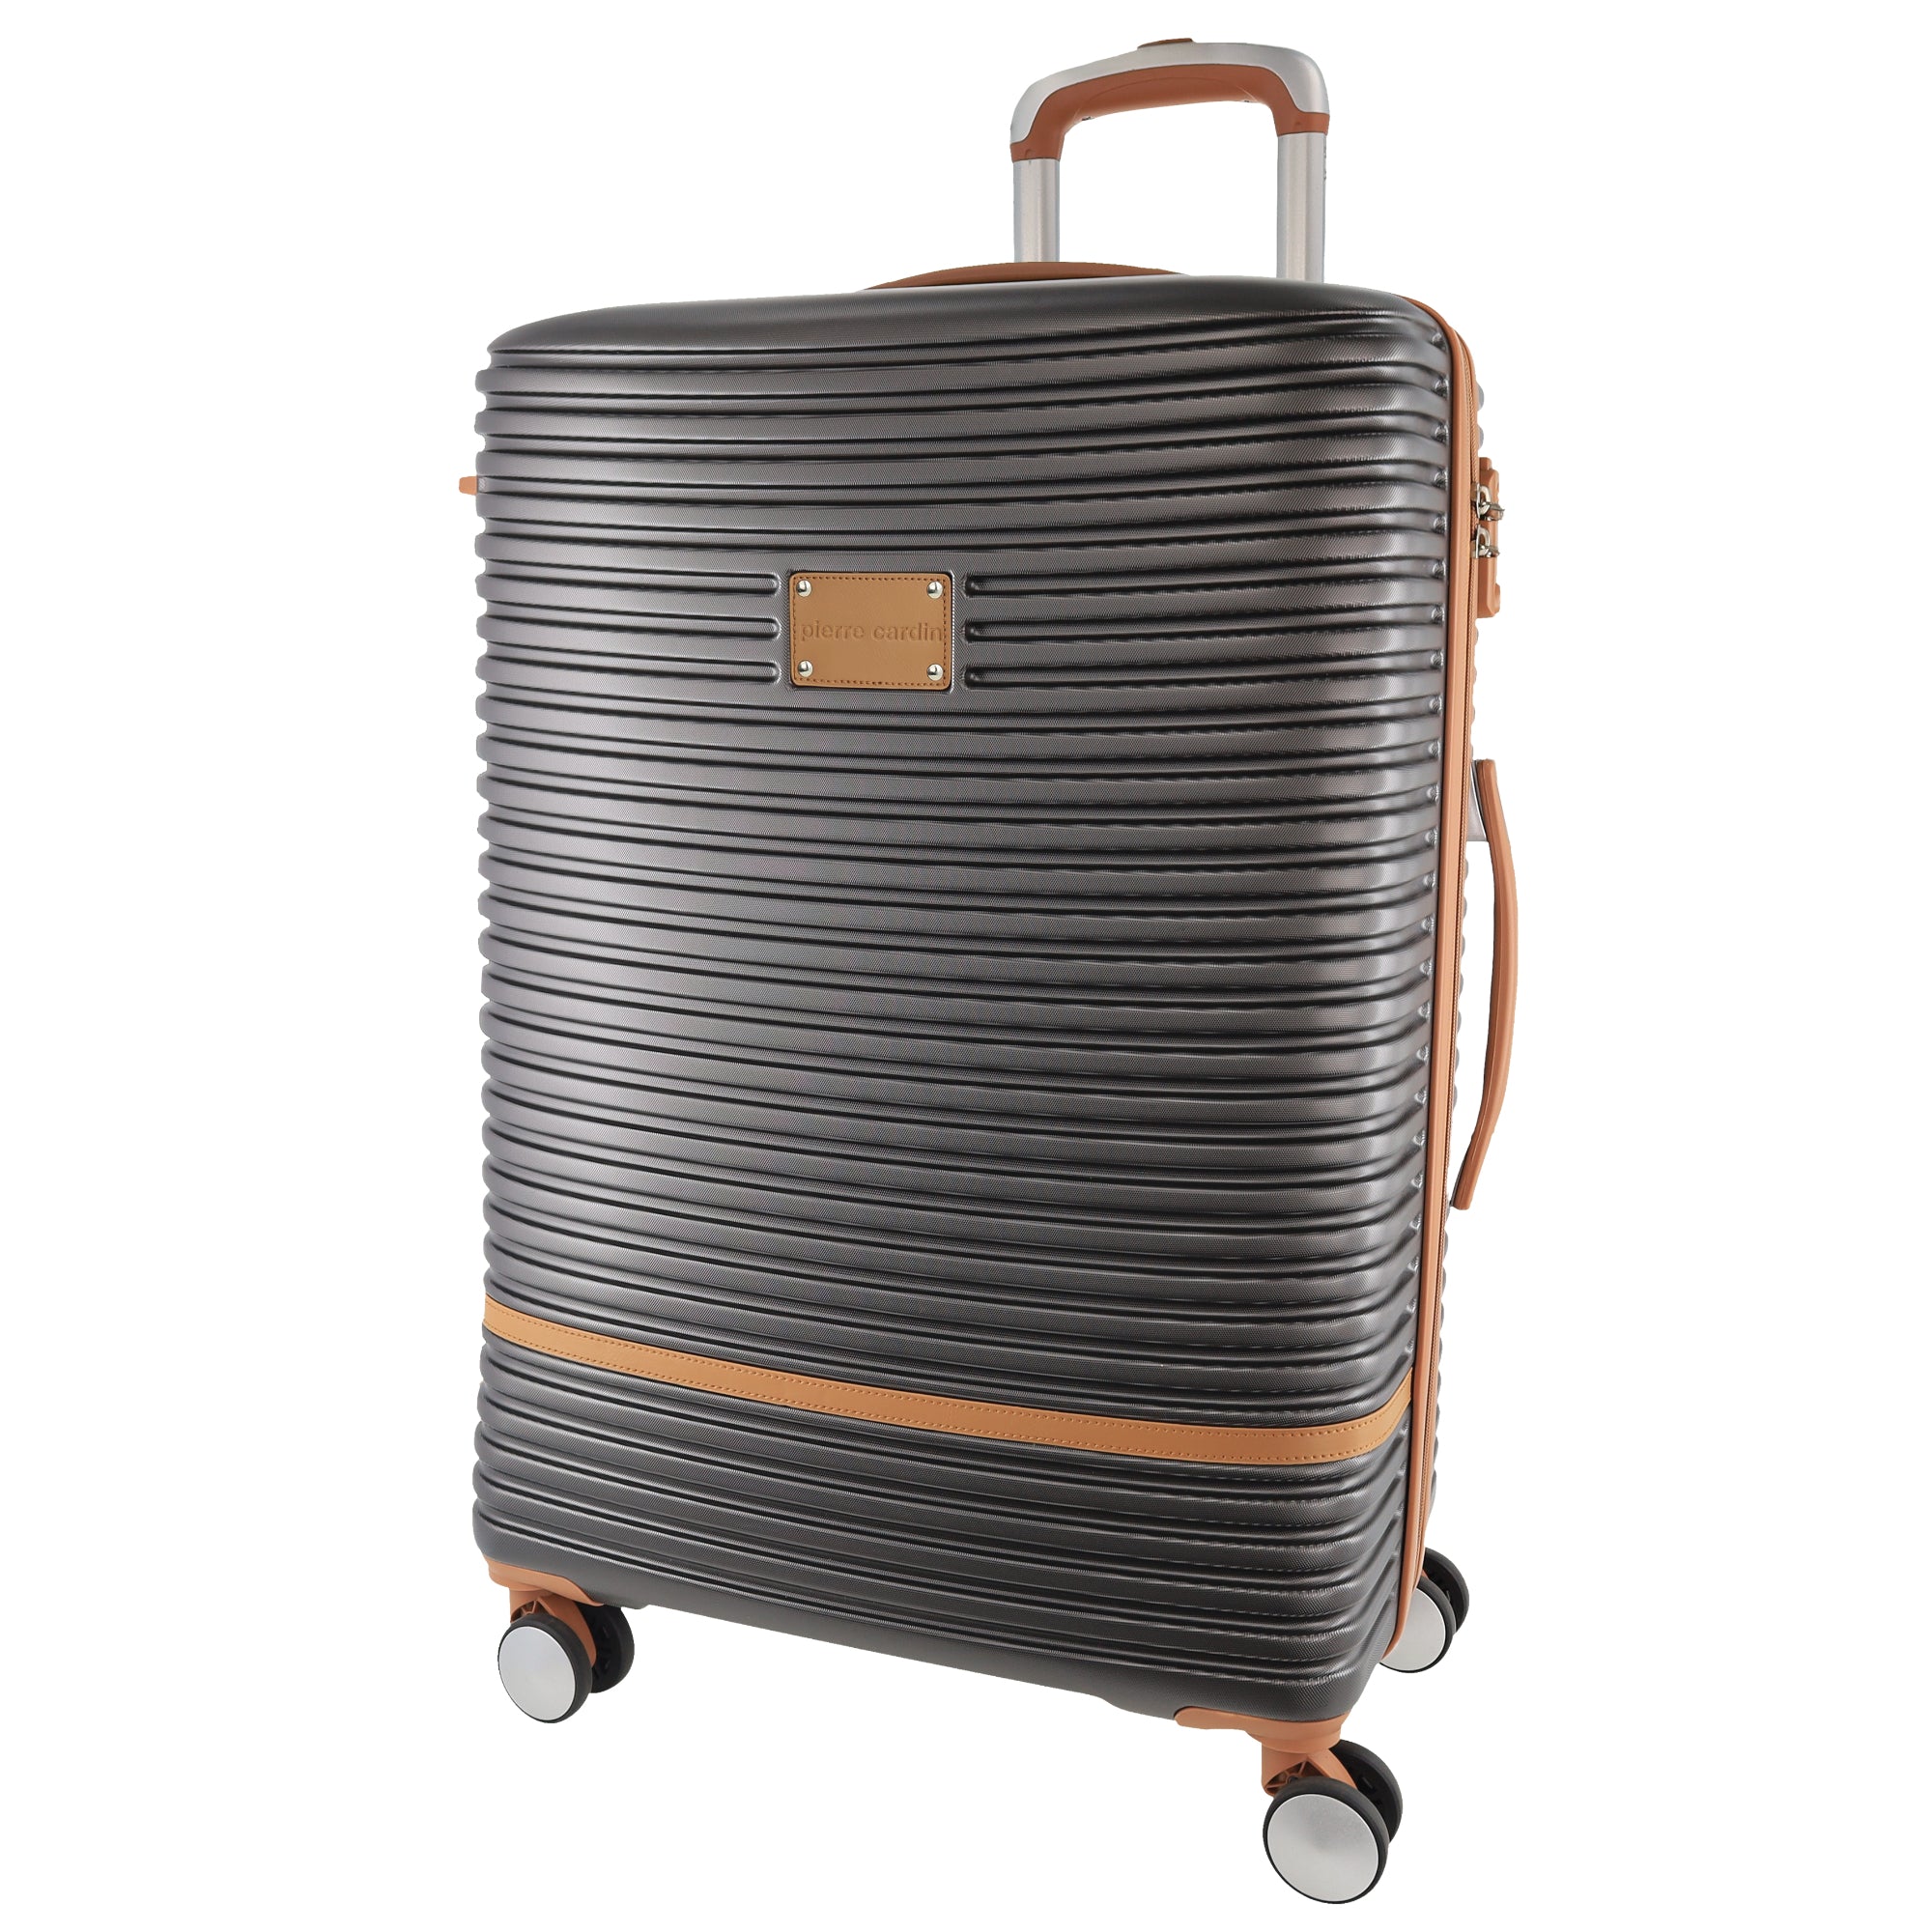 Pierre Cardin 80cm LARGE Hard Shell Suitcase in White